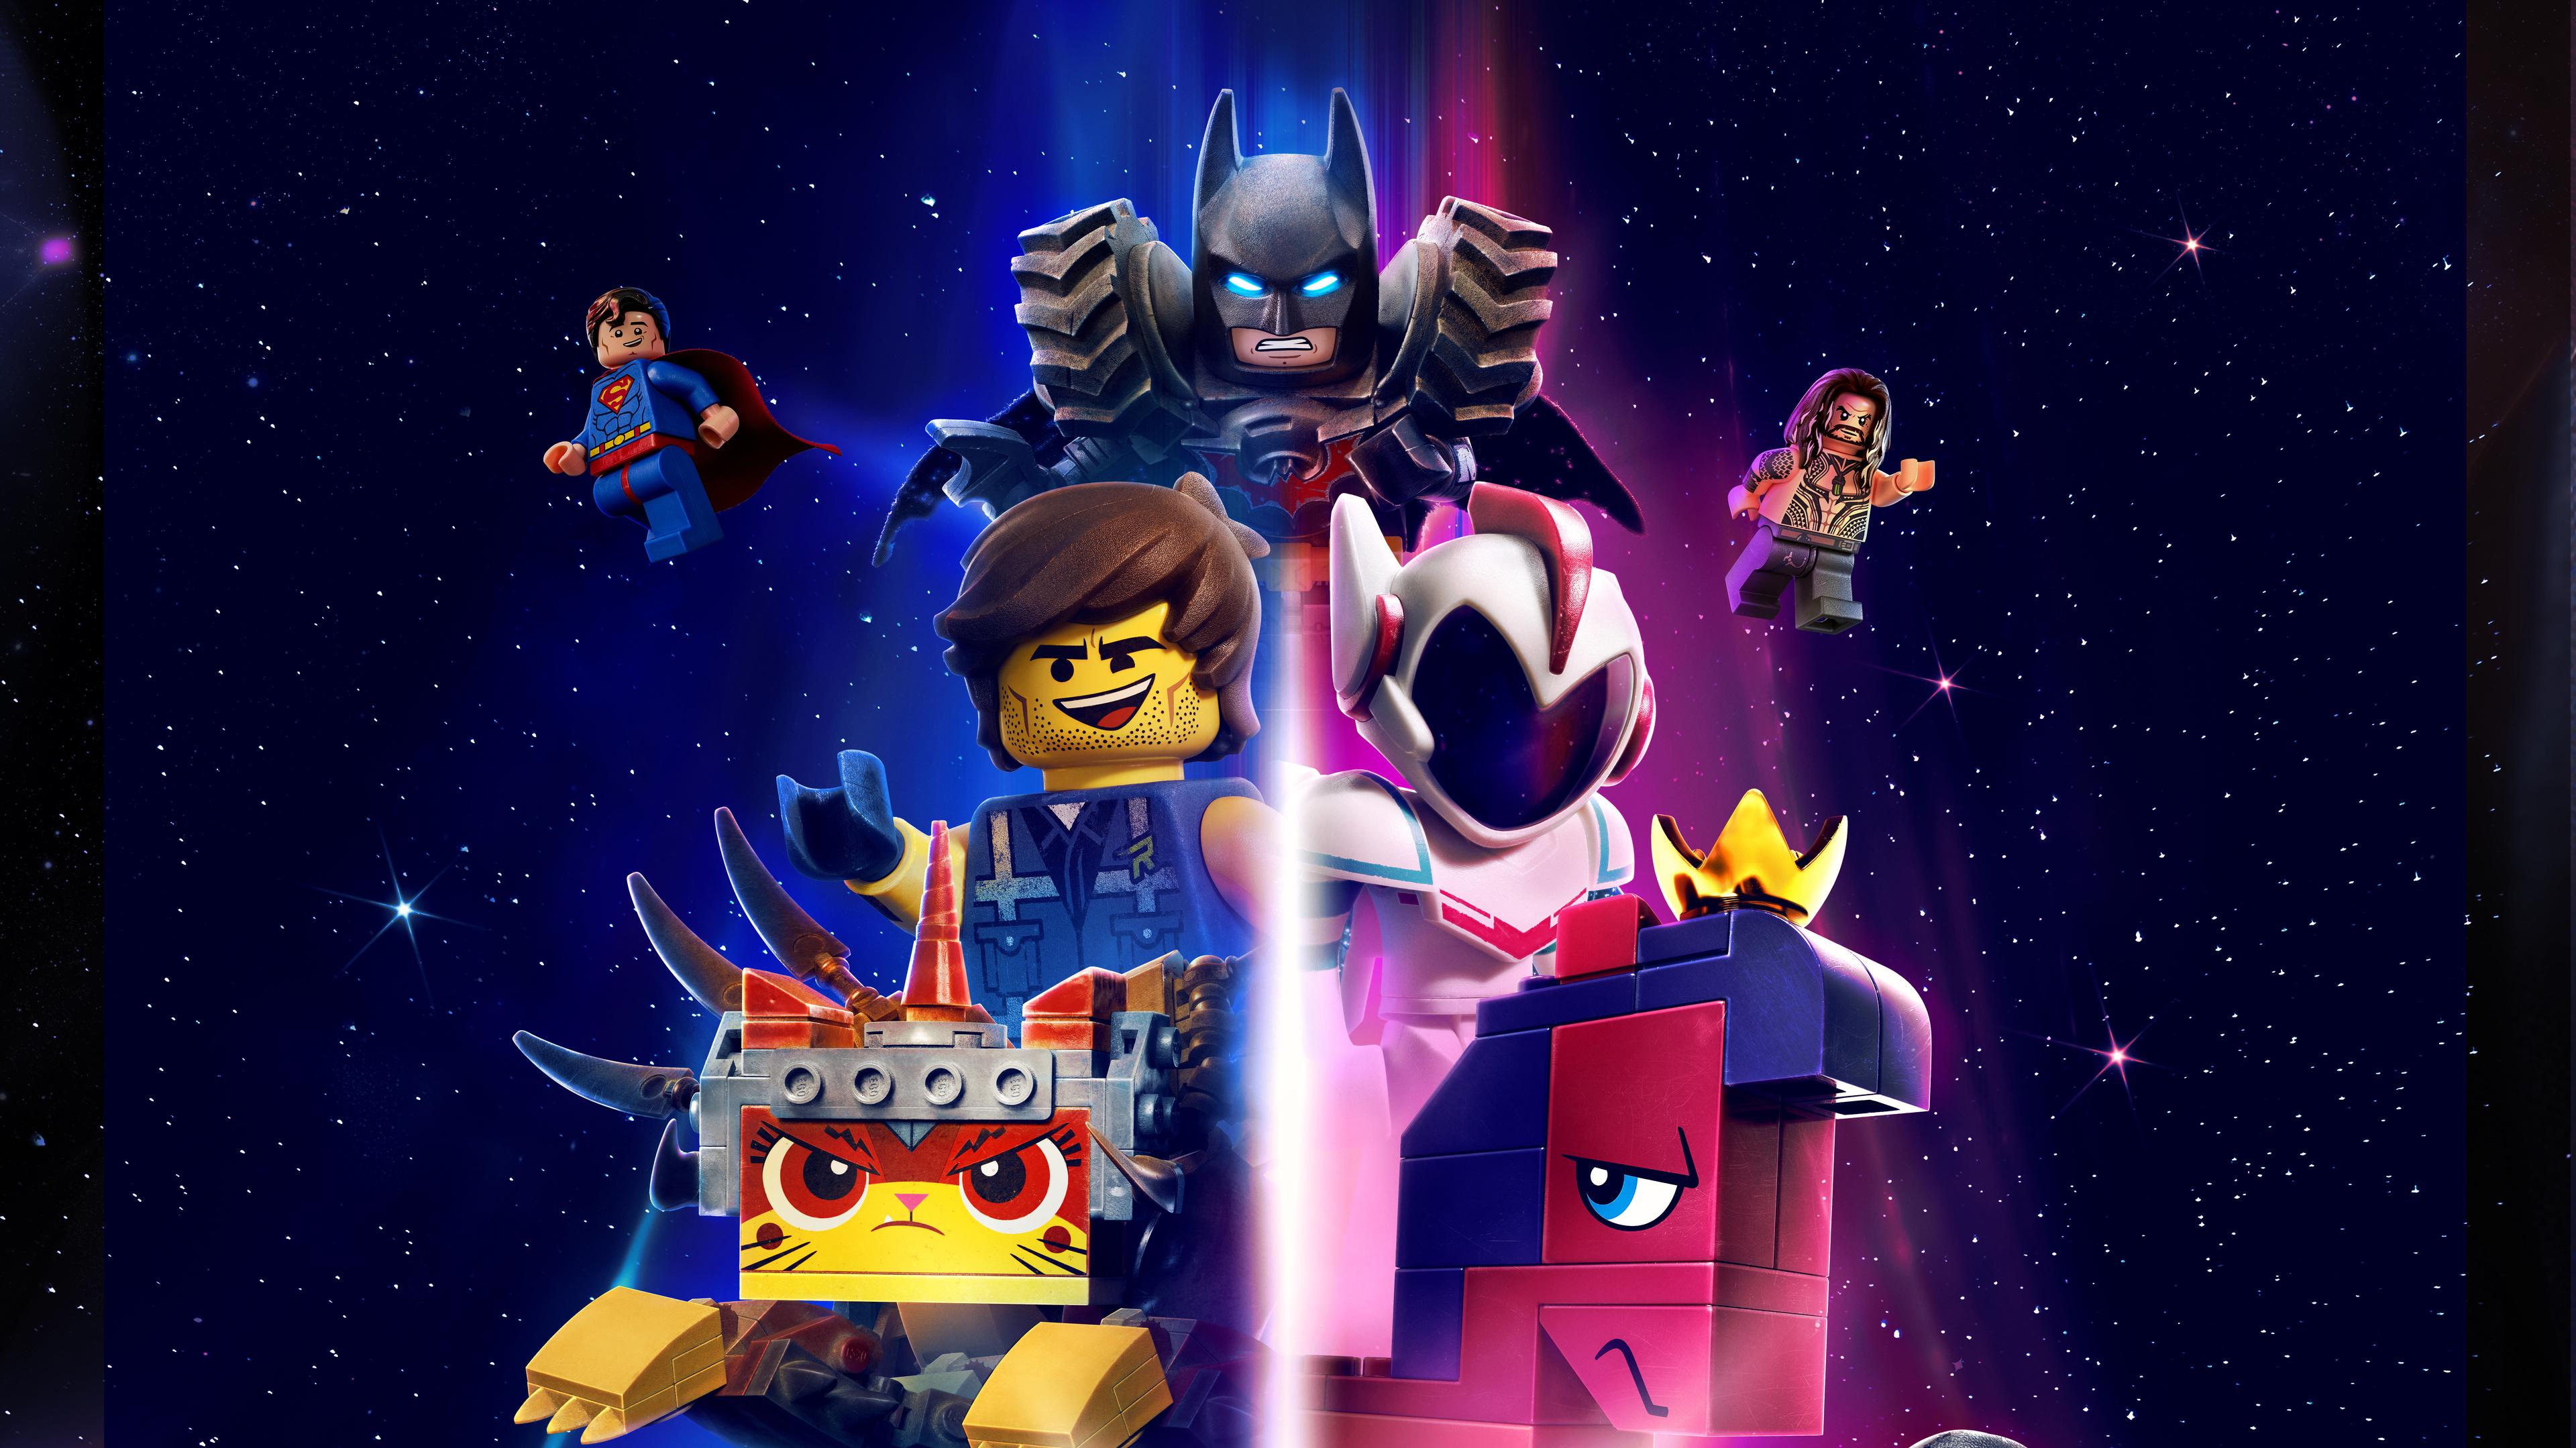 Wallpaper 4k The Lego Movie Second Part